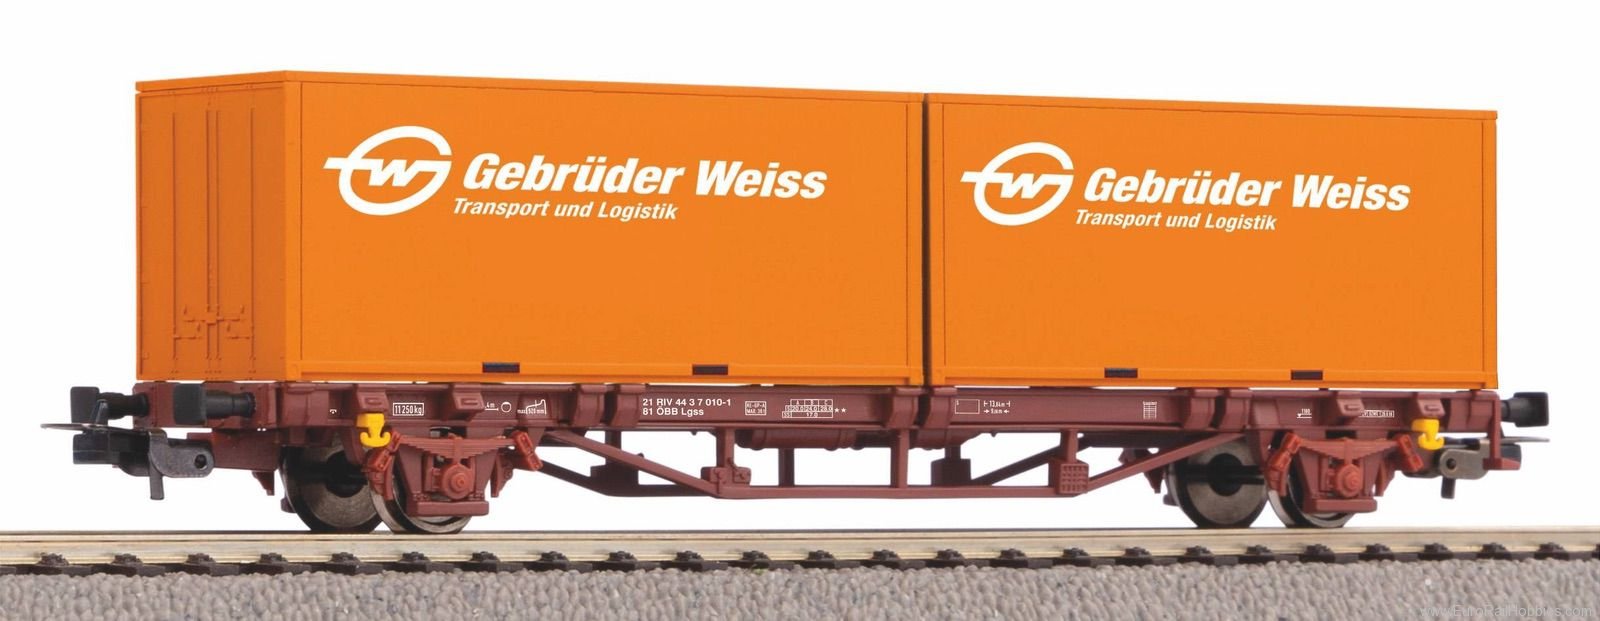 Piko 97151 Container transport car Lgs579 OBB V Gebr. We